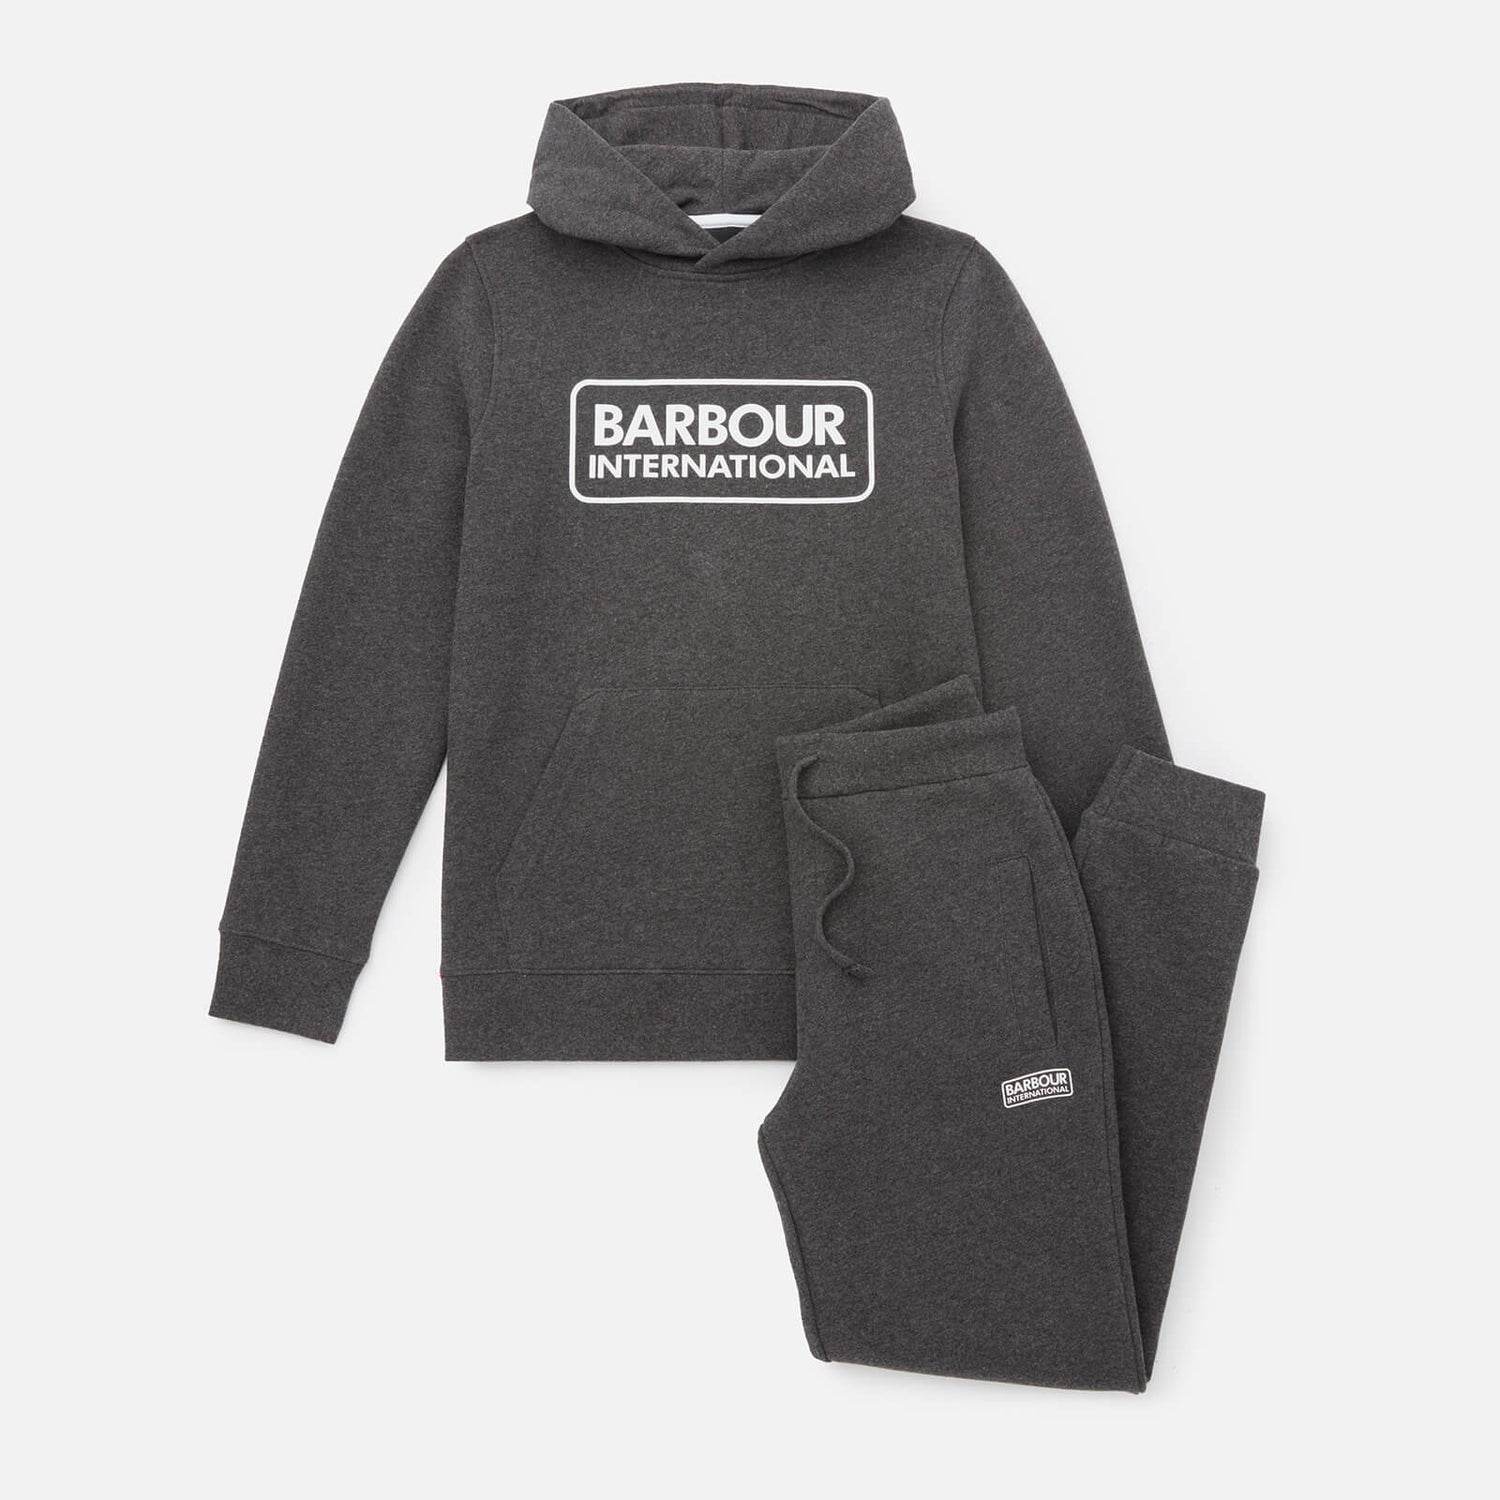 Barbour International Boys Logo-Printed Cotton-Blend Tracksuit - L (10-11 Years)